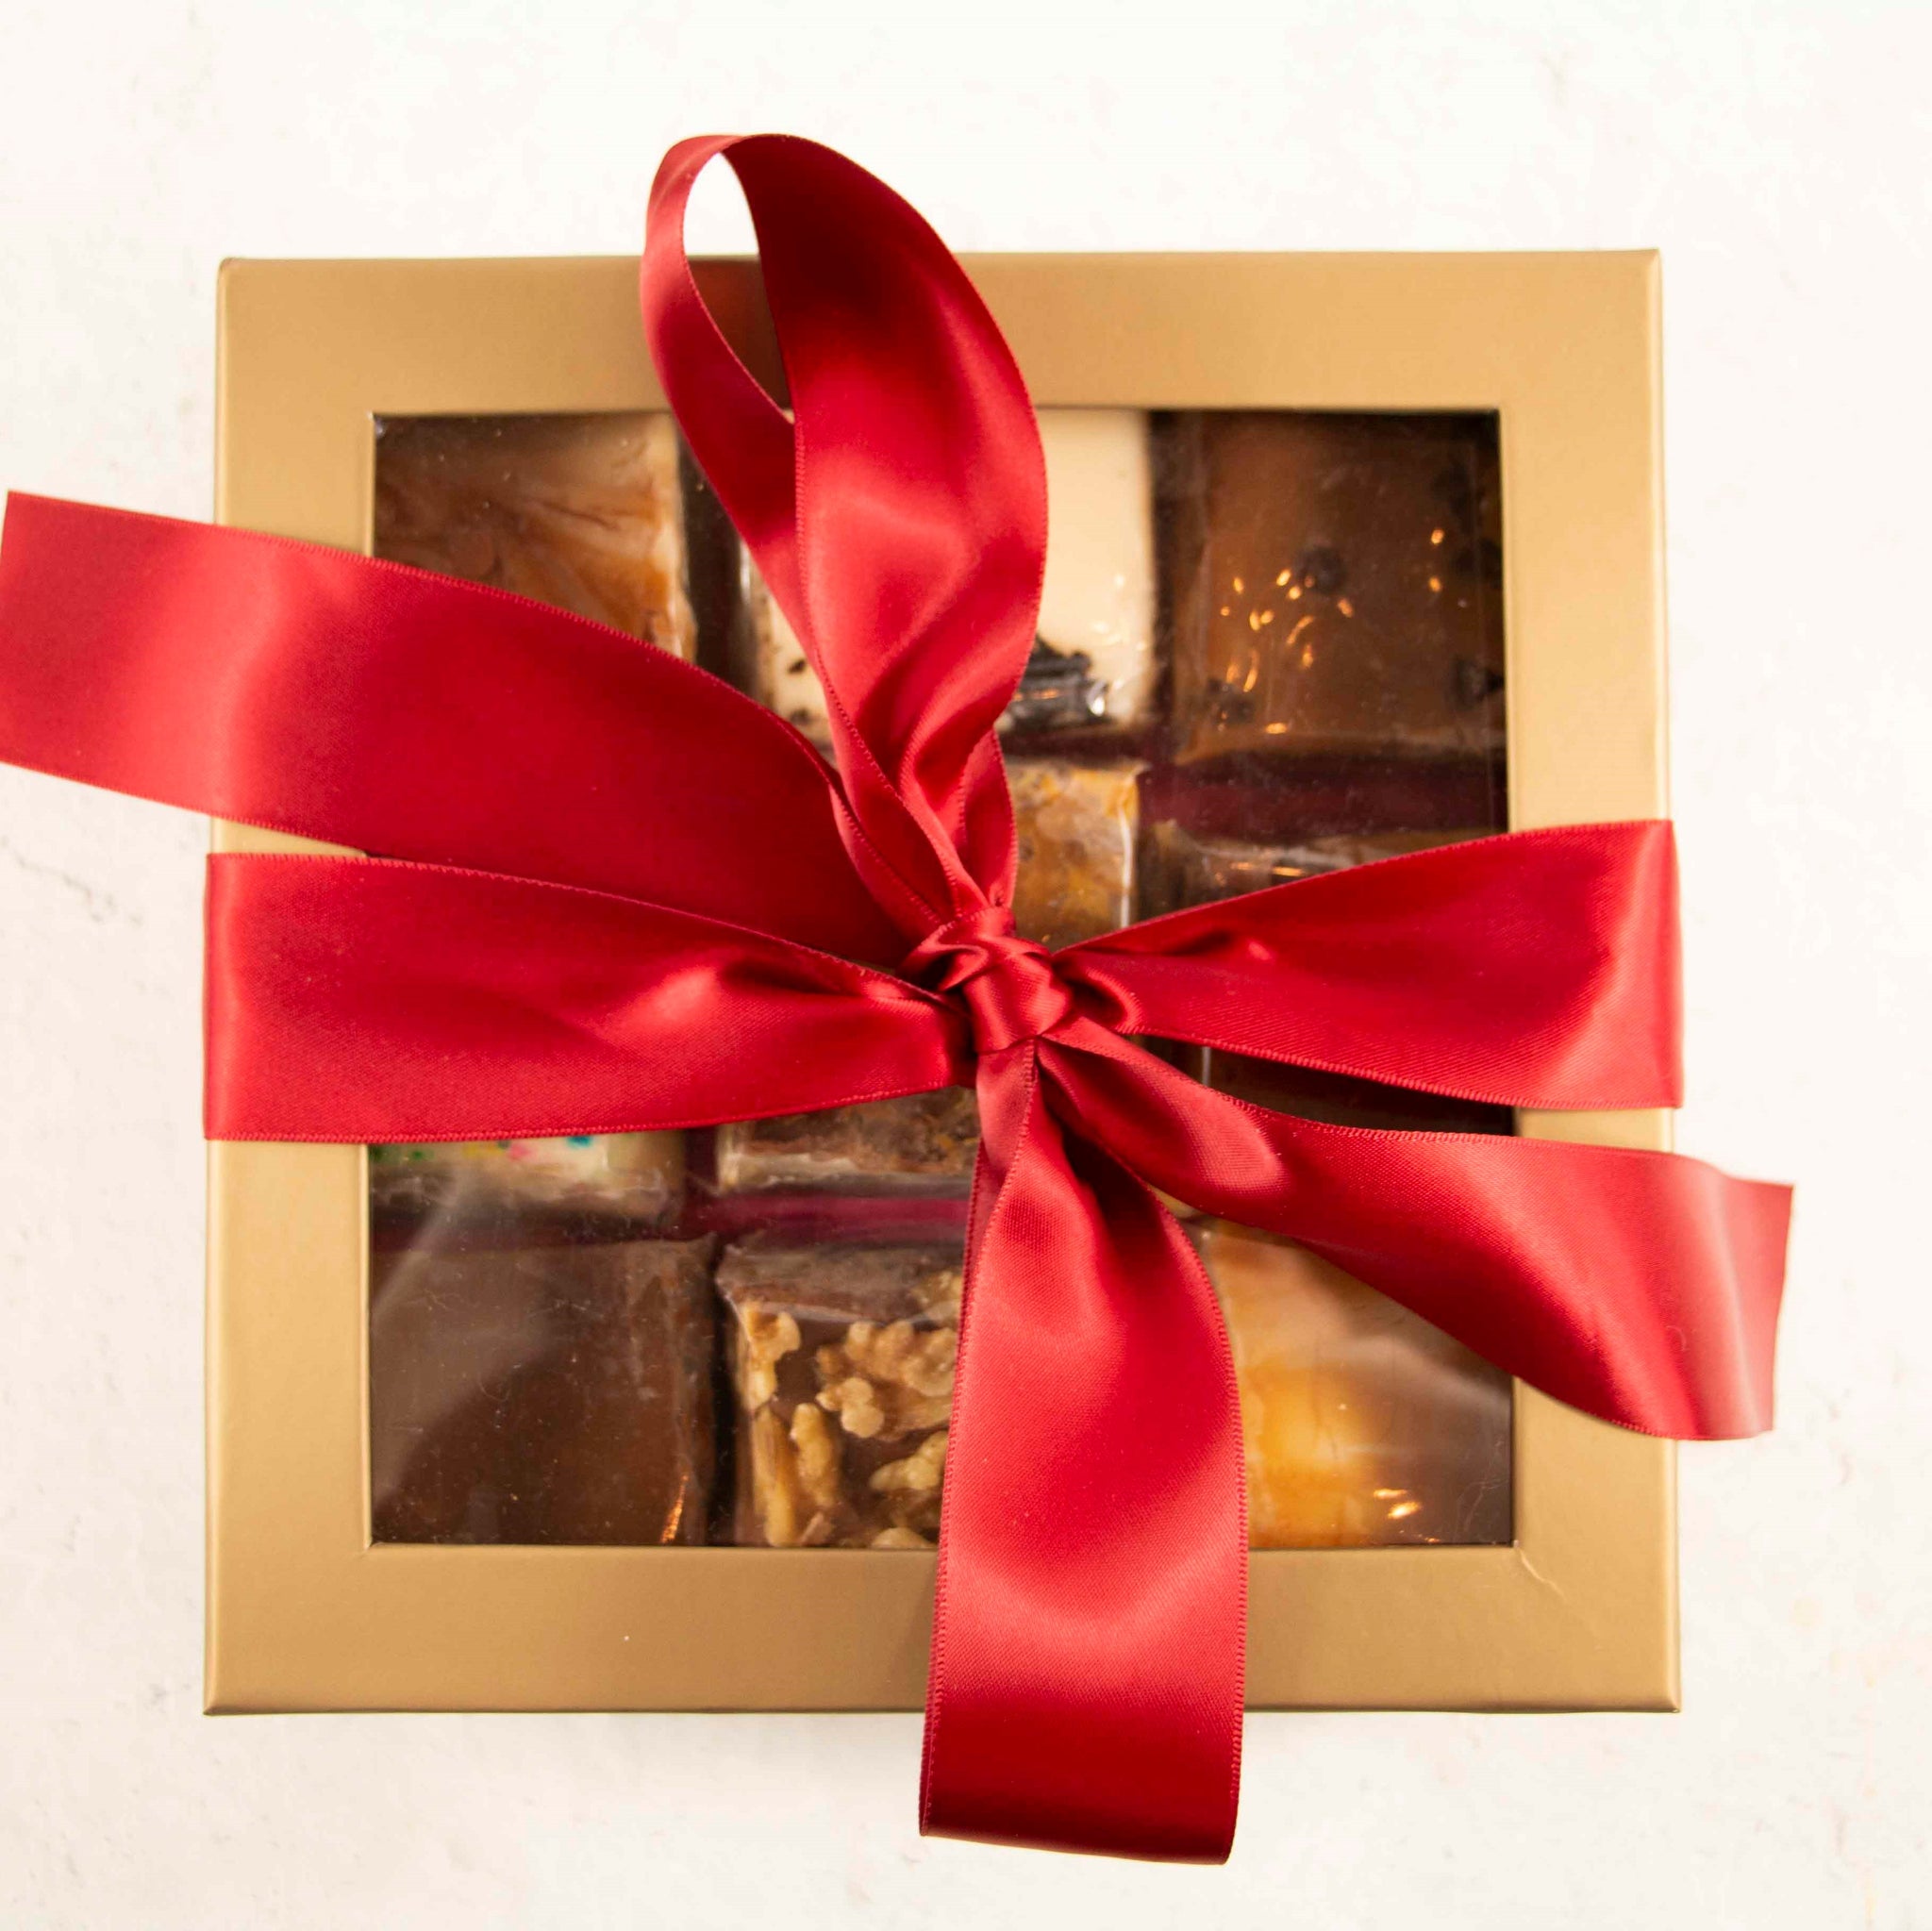 Assorted Chocolate Gold Gift Box, Red Ribbon, 9 pc.